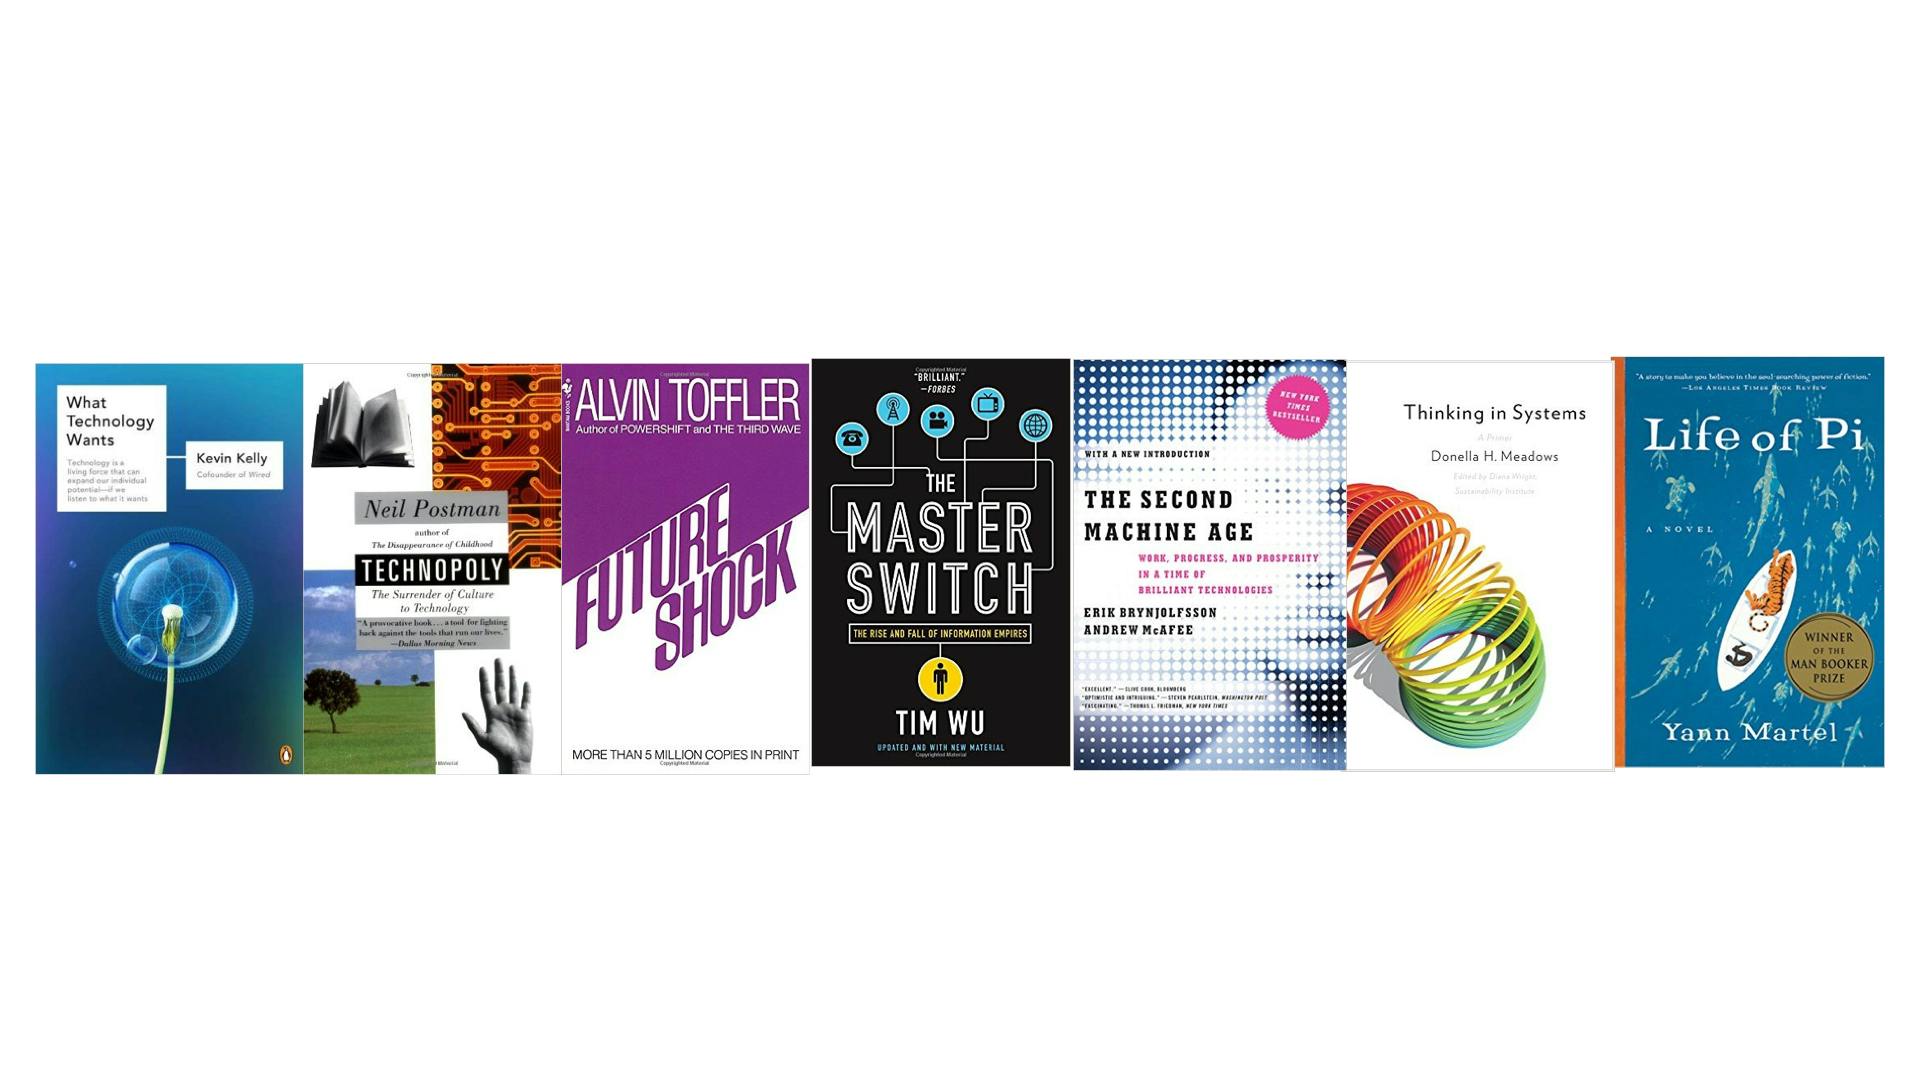 /9-books-to-help-you-understand-technology-and-systems-bb3f4d2d9dda feature image